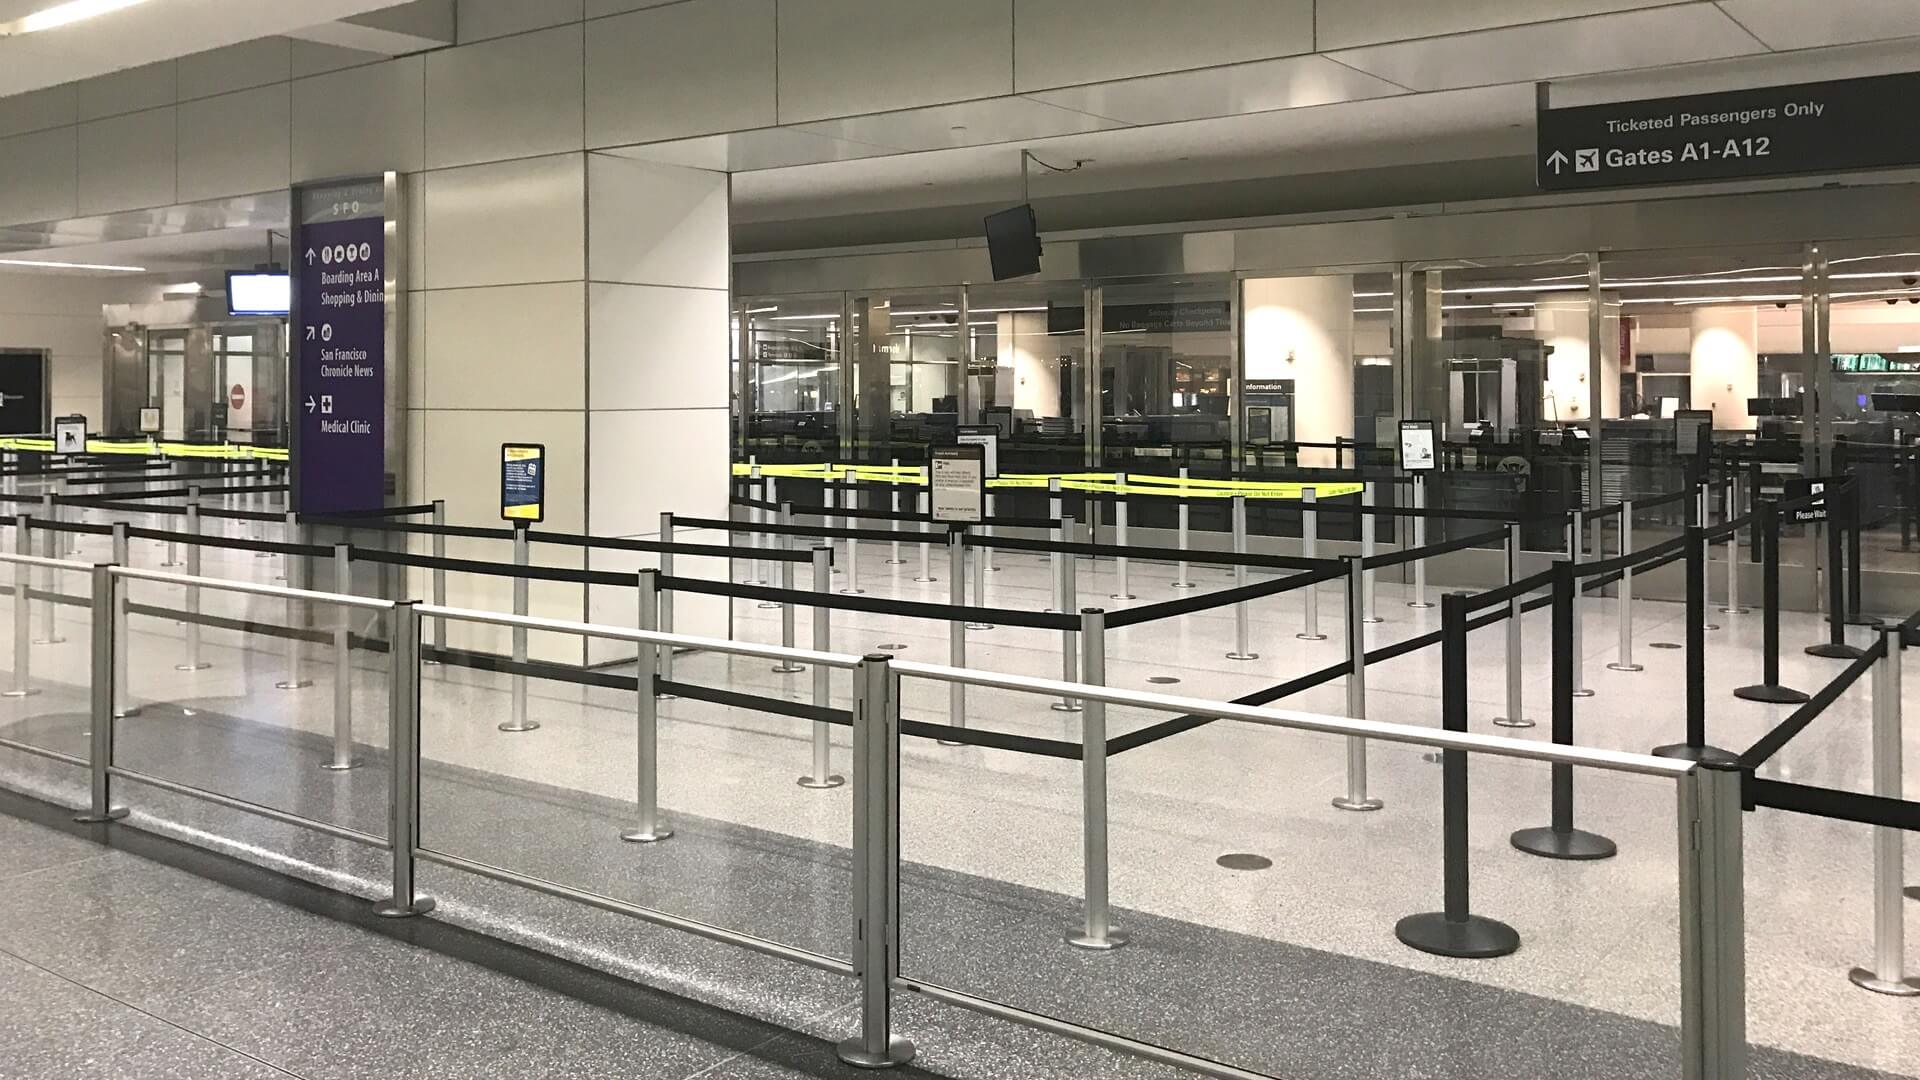 Airport,Queuing,Stanchions,MagneticBase,Barriers,HingedFramePanels